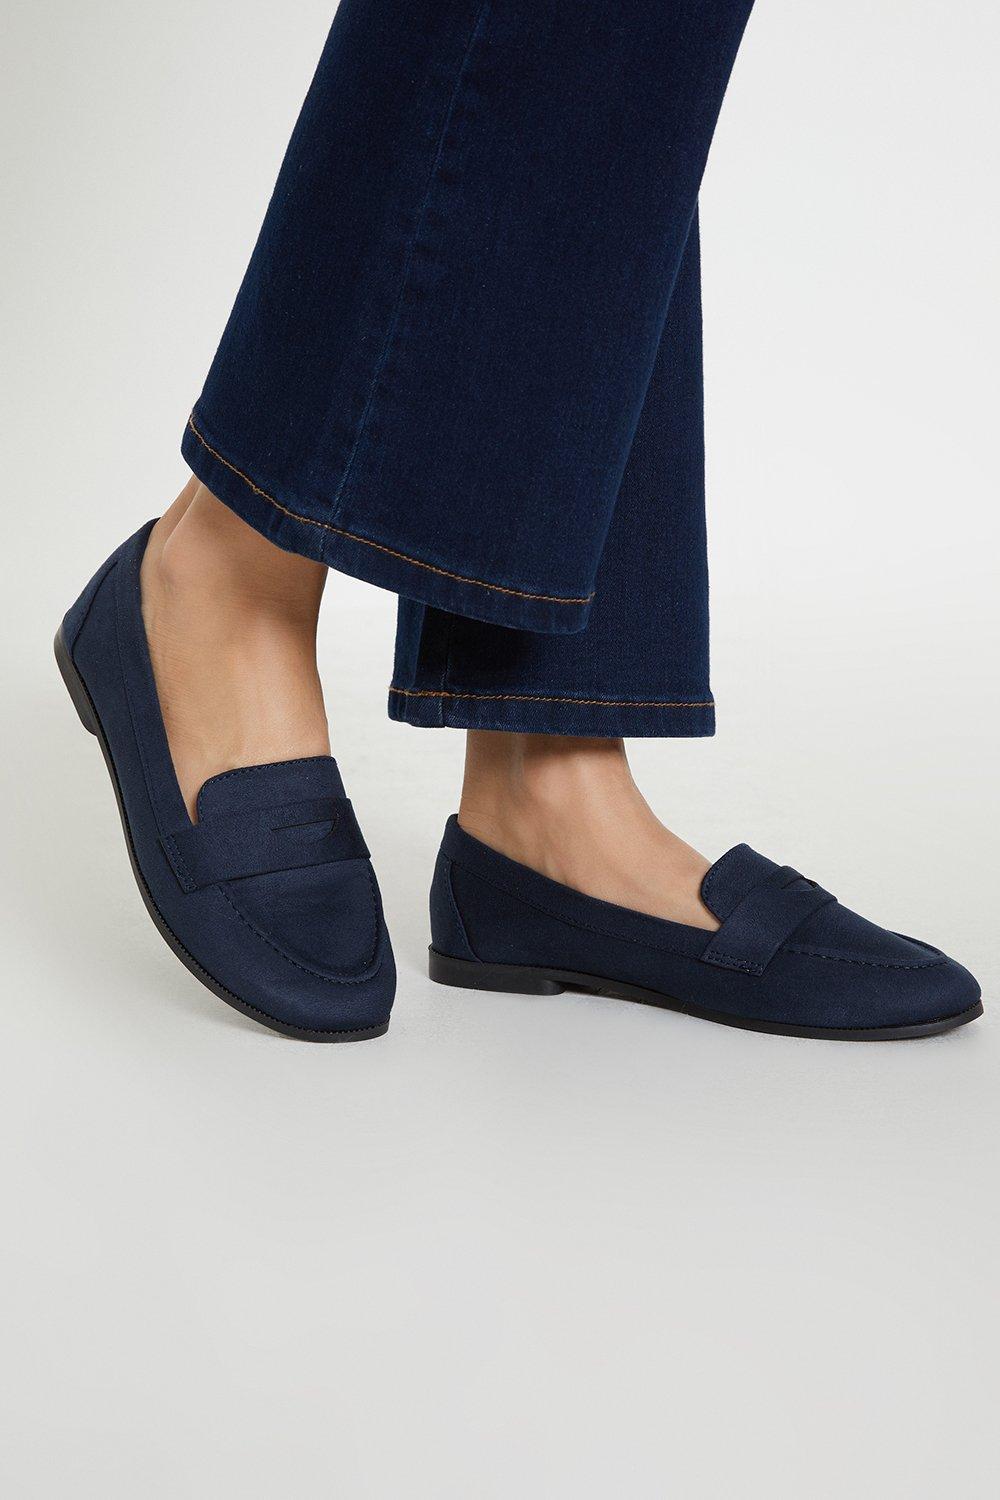 Women’s Wide Fit Lana Penny Loafers - navy - 9